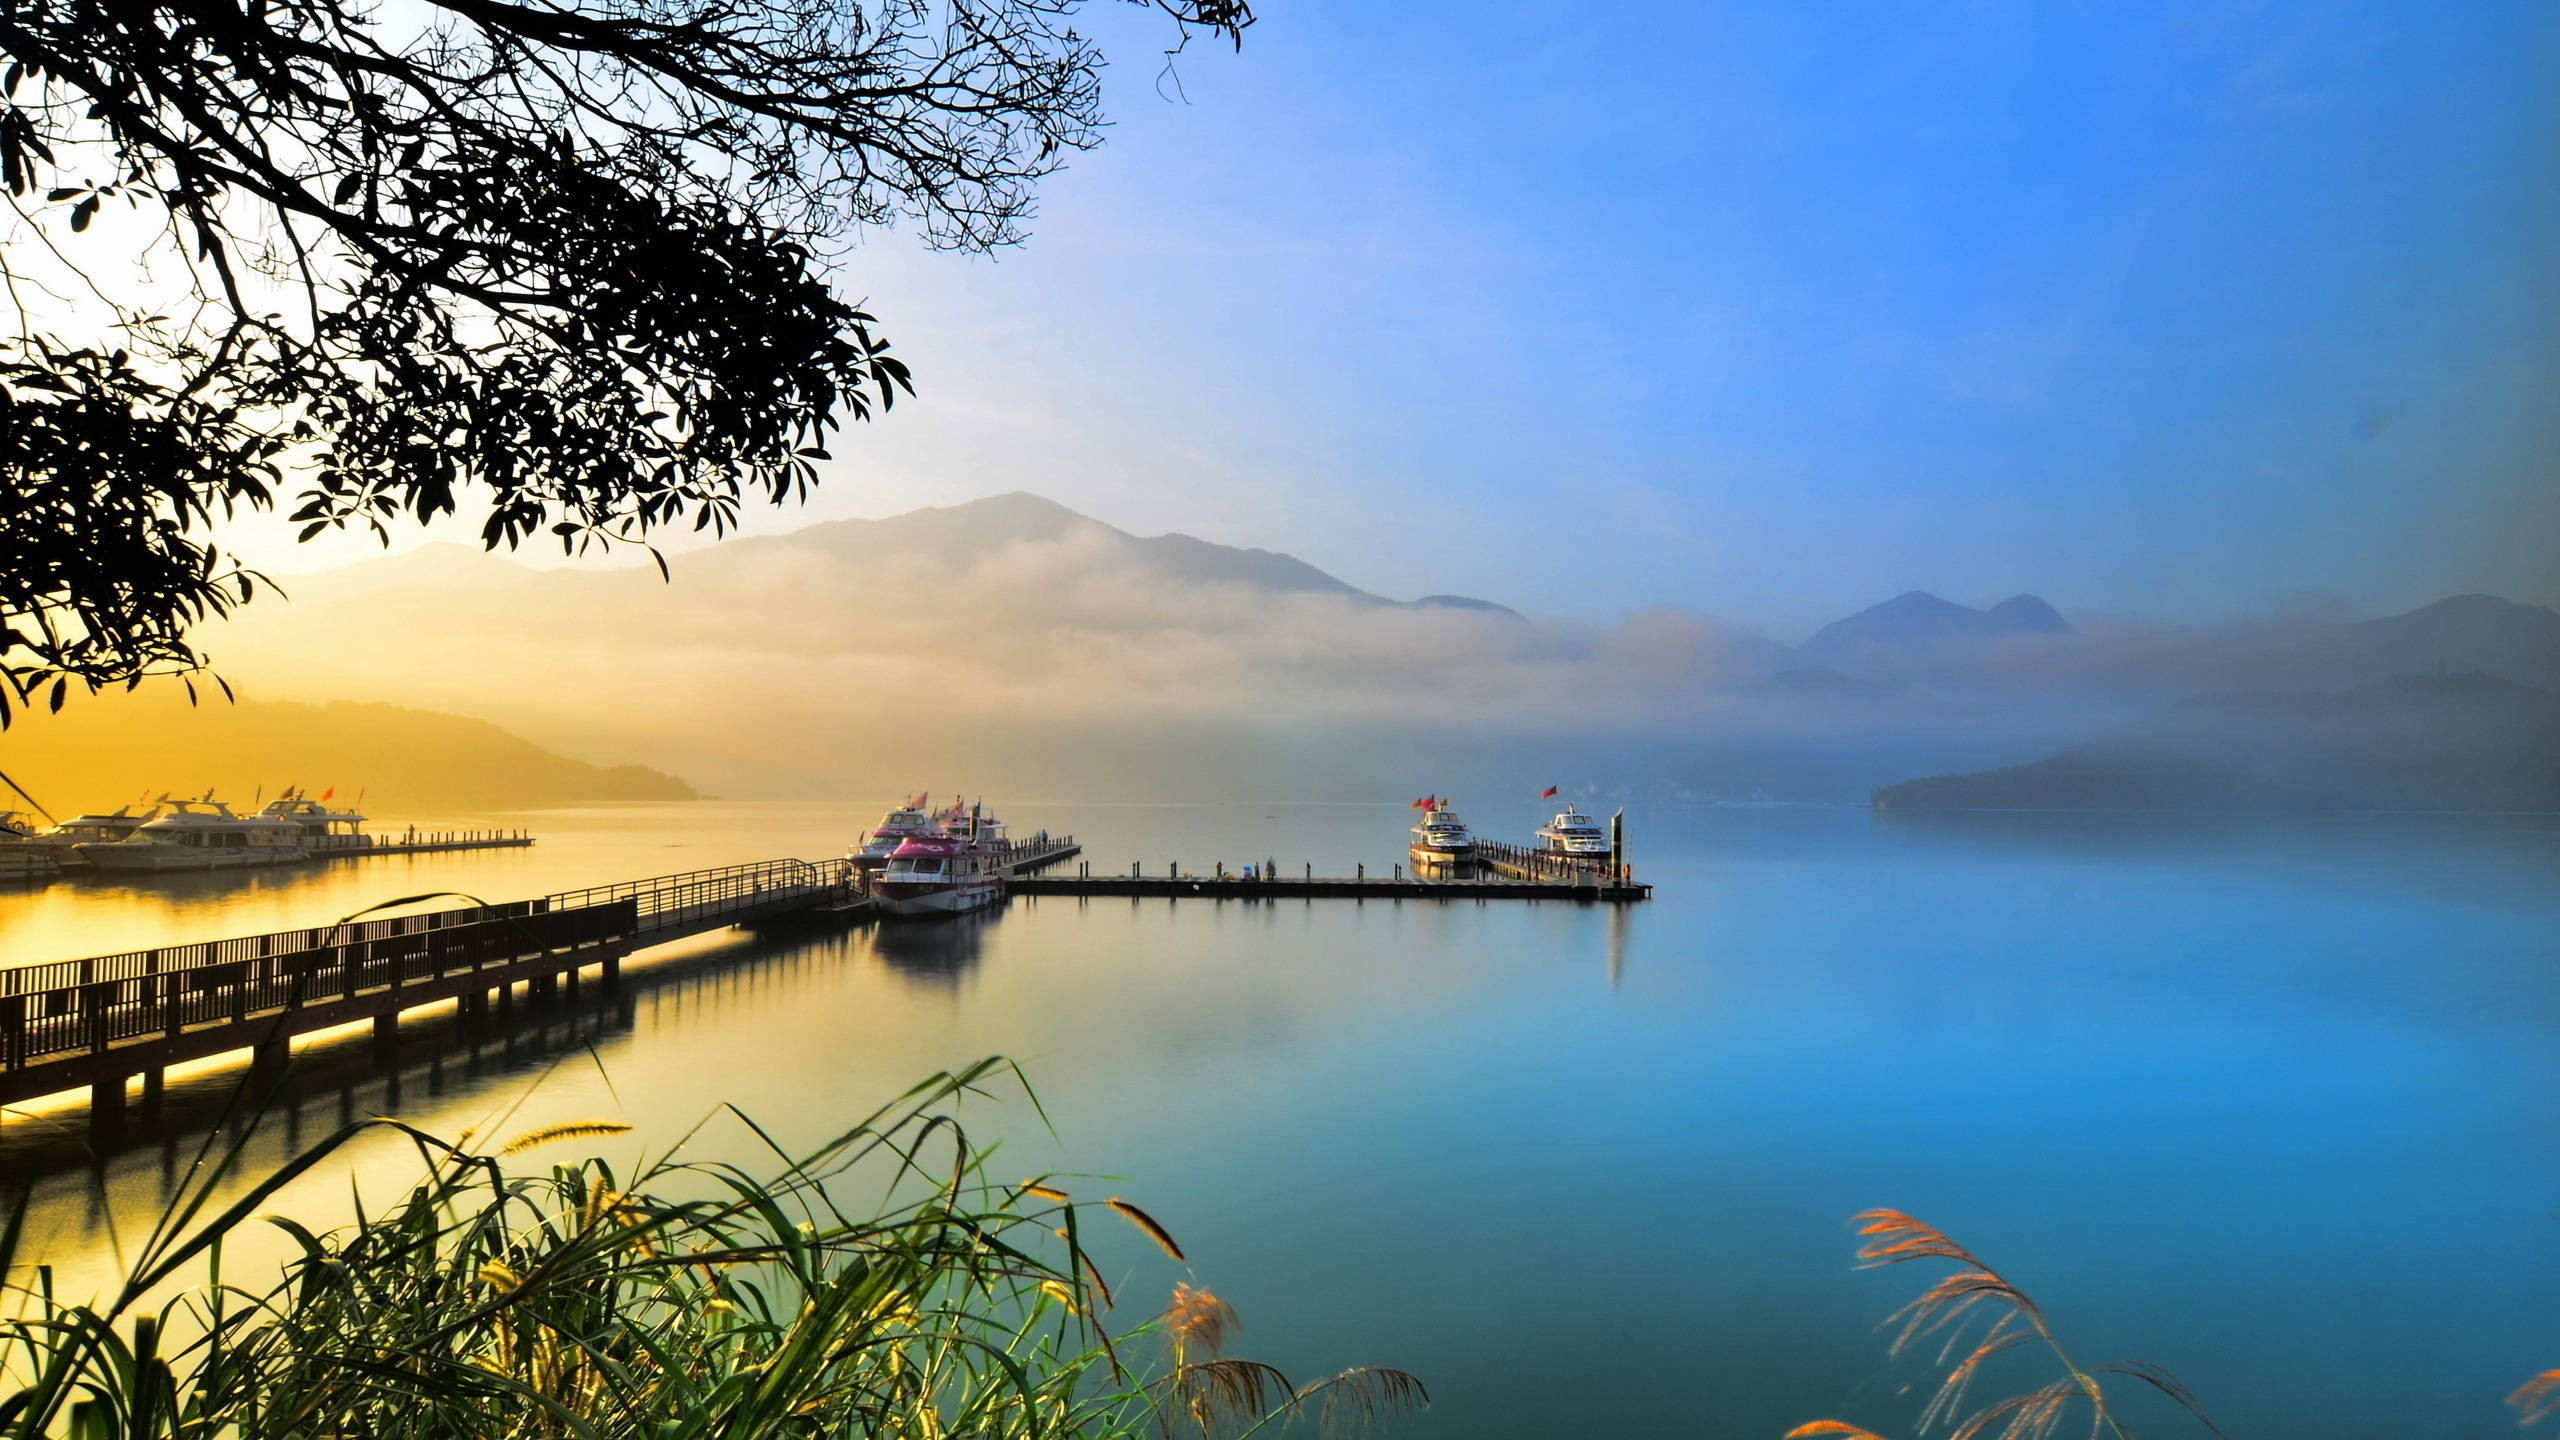 General 2560x1440 nature landscape lake sunlight calm waters boat vehicle mountains outdoors